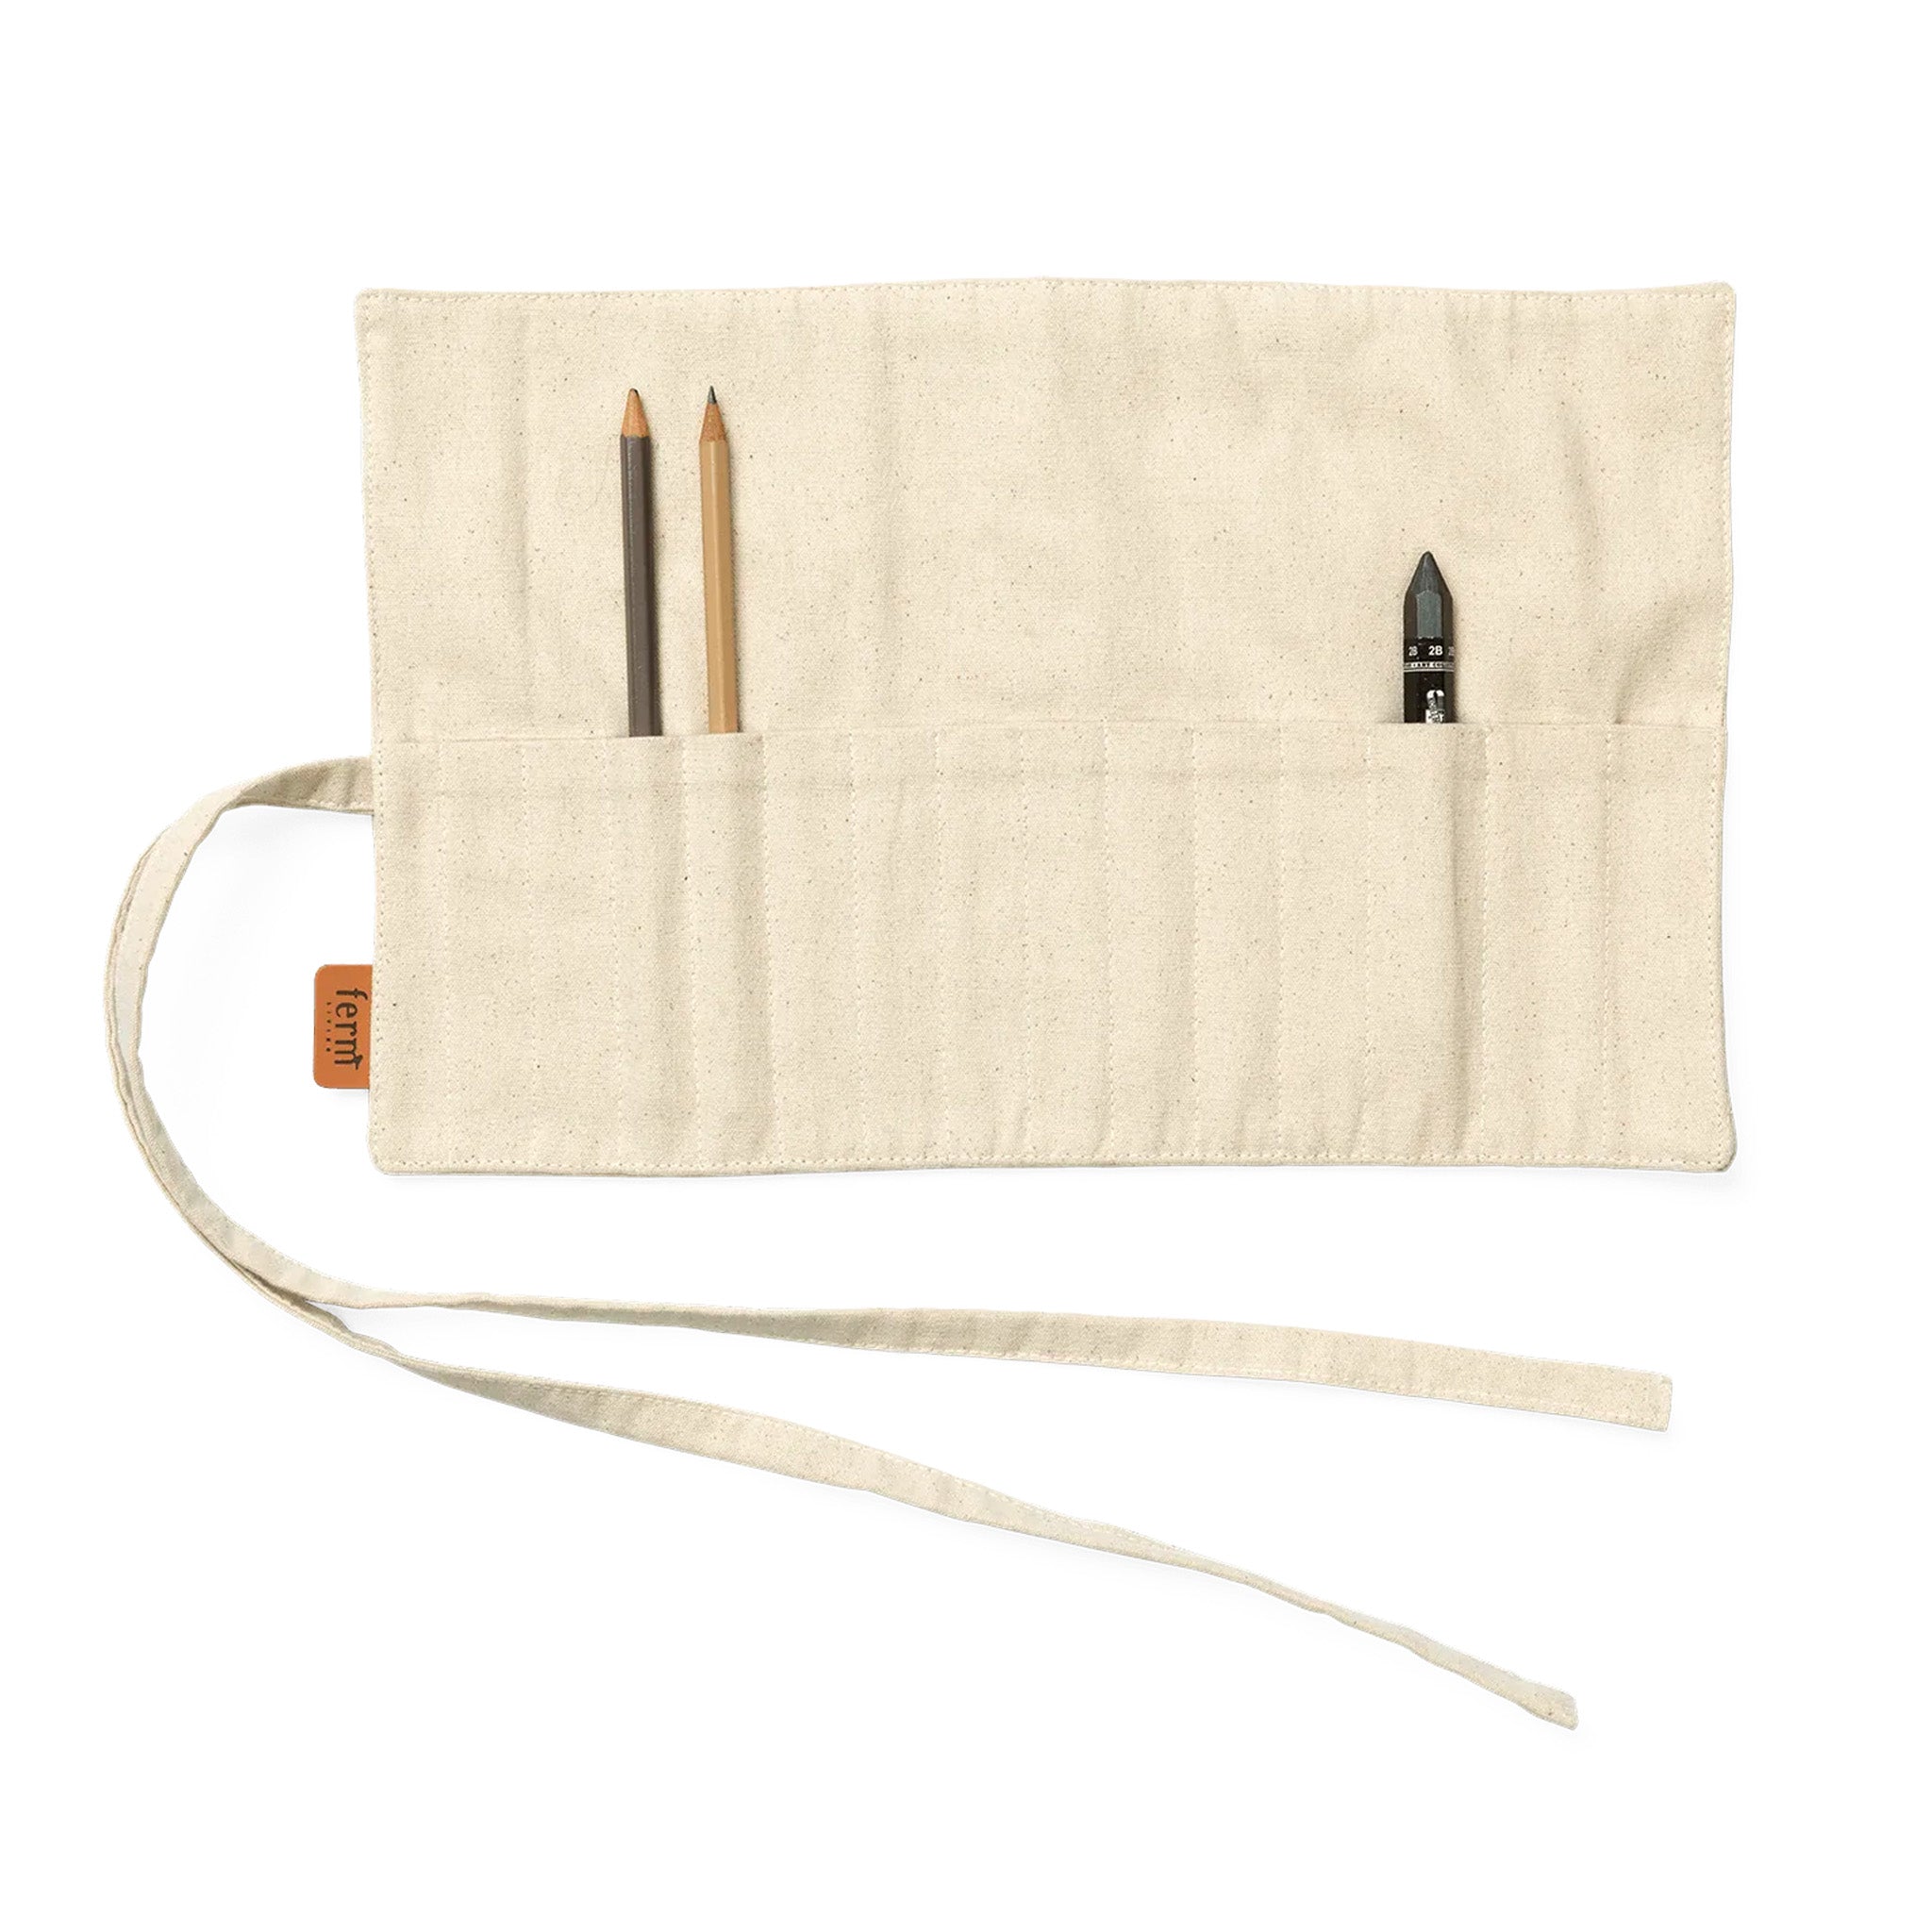 Ally Pencil Wrap by Ferm Living